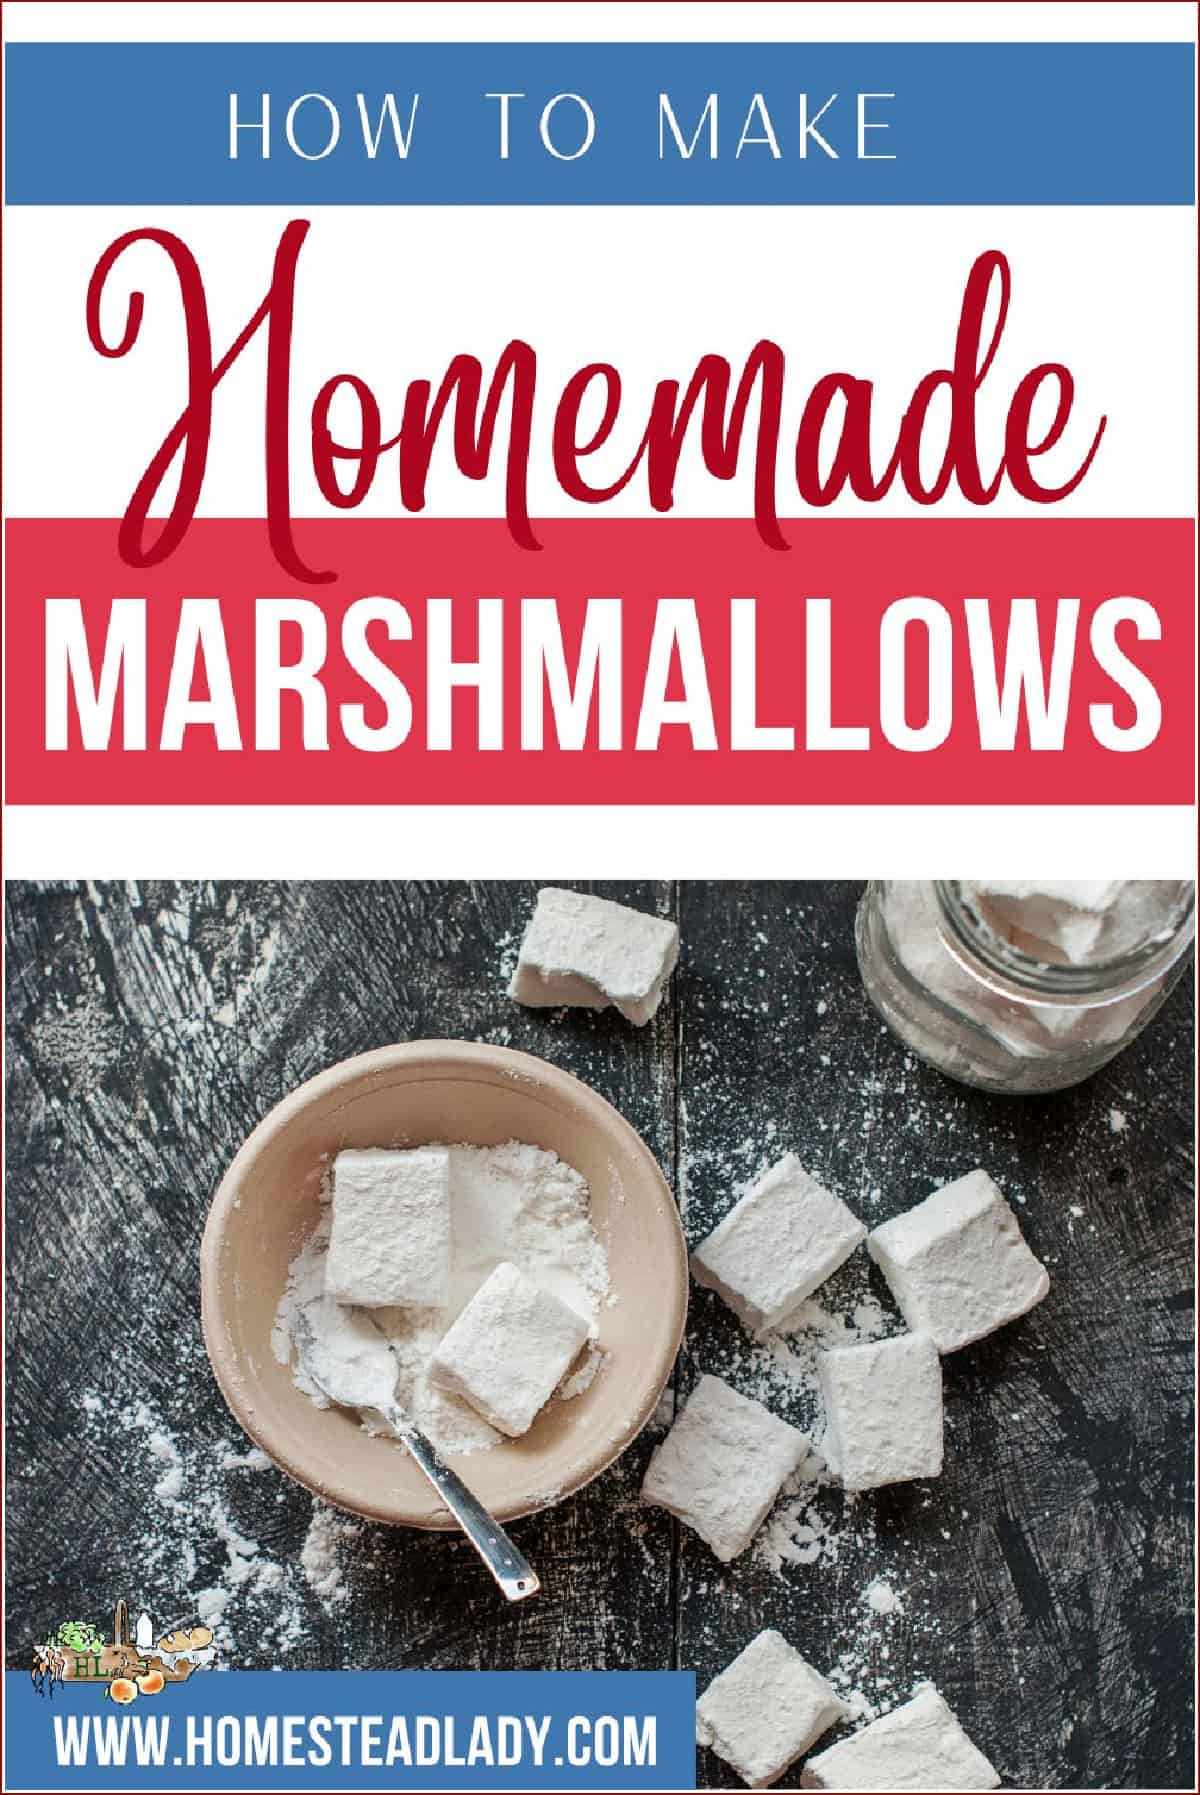 homemade marshmallows in a bowl on a table